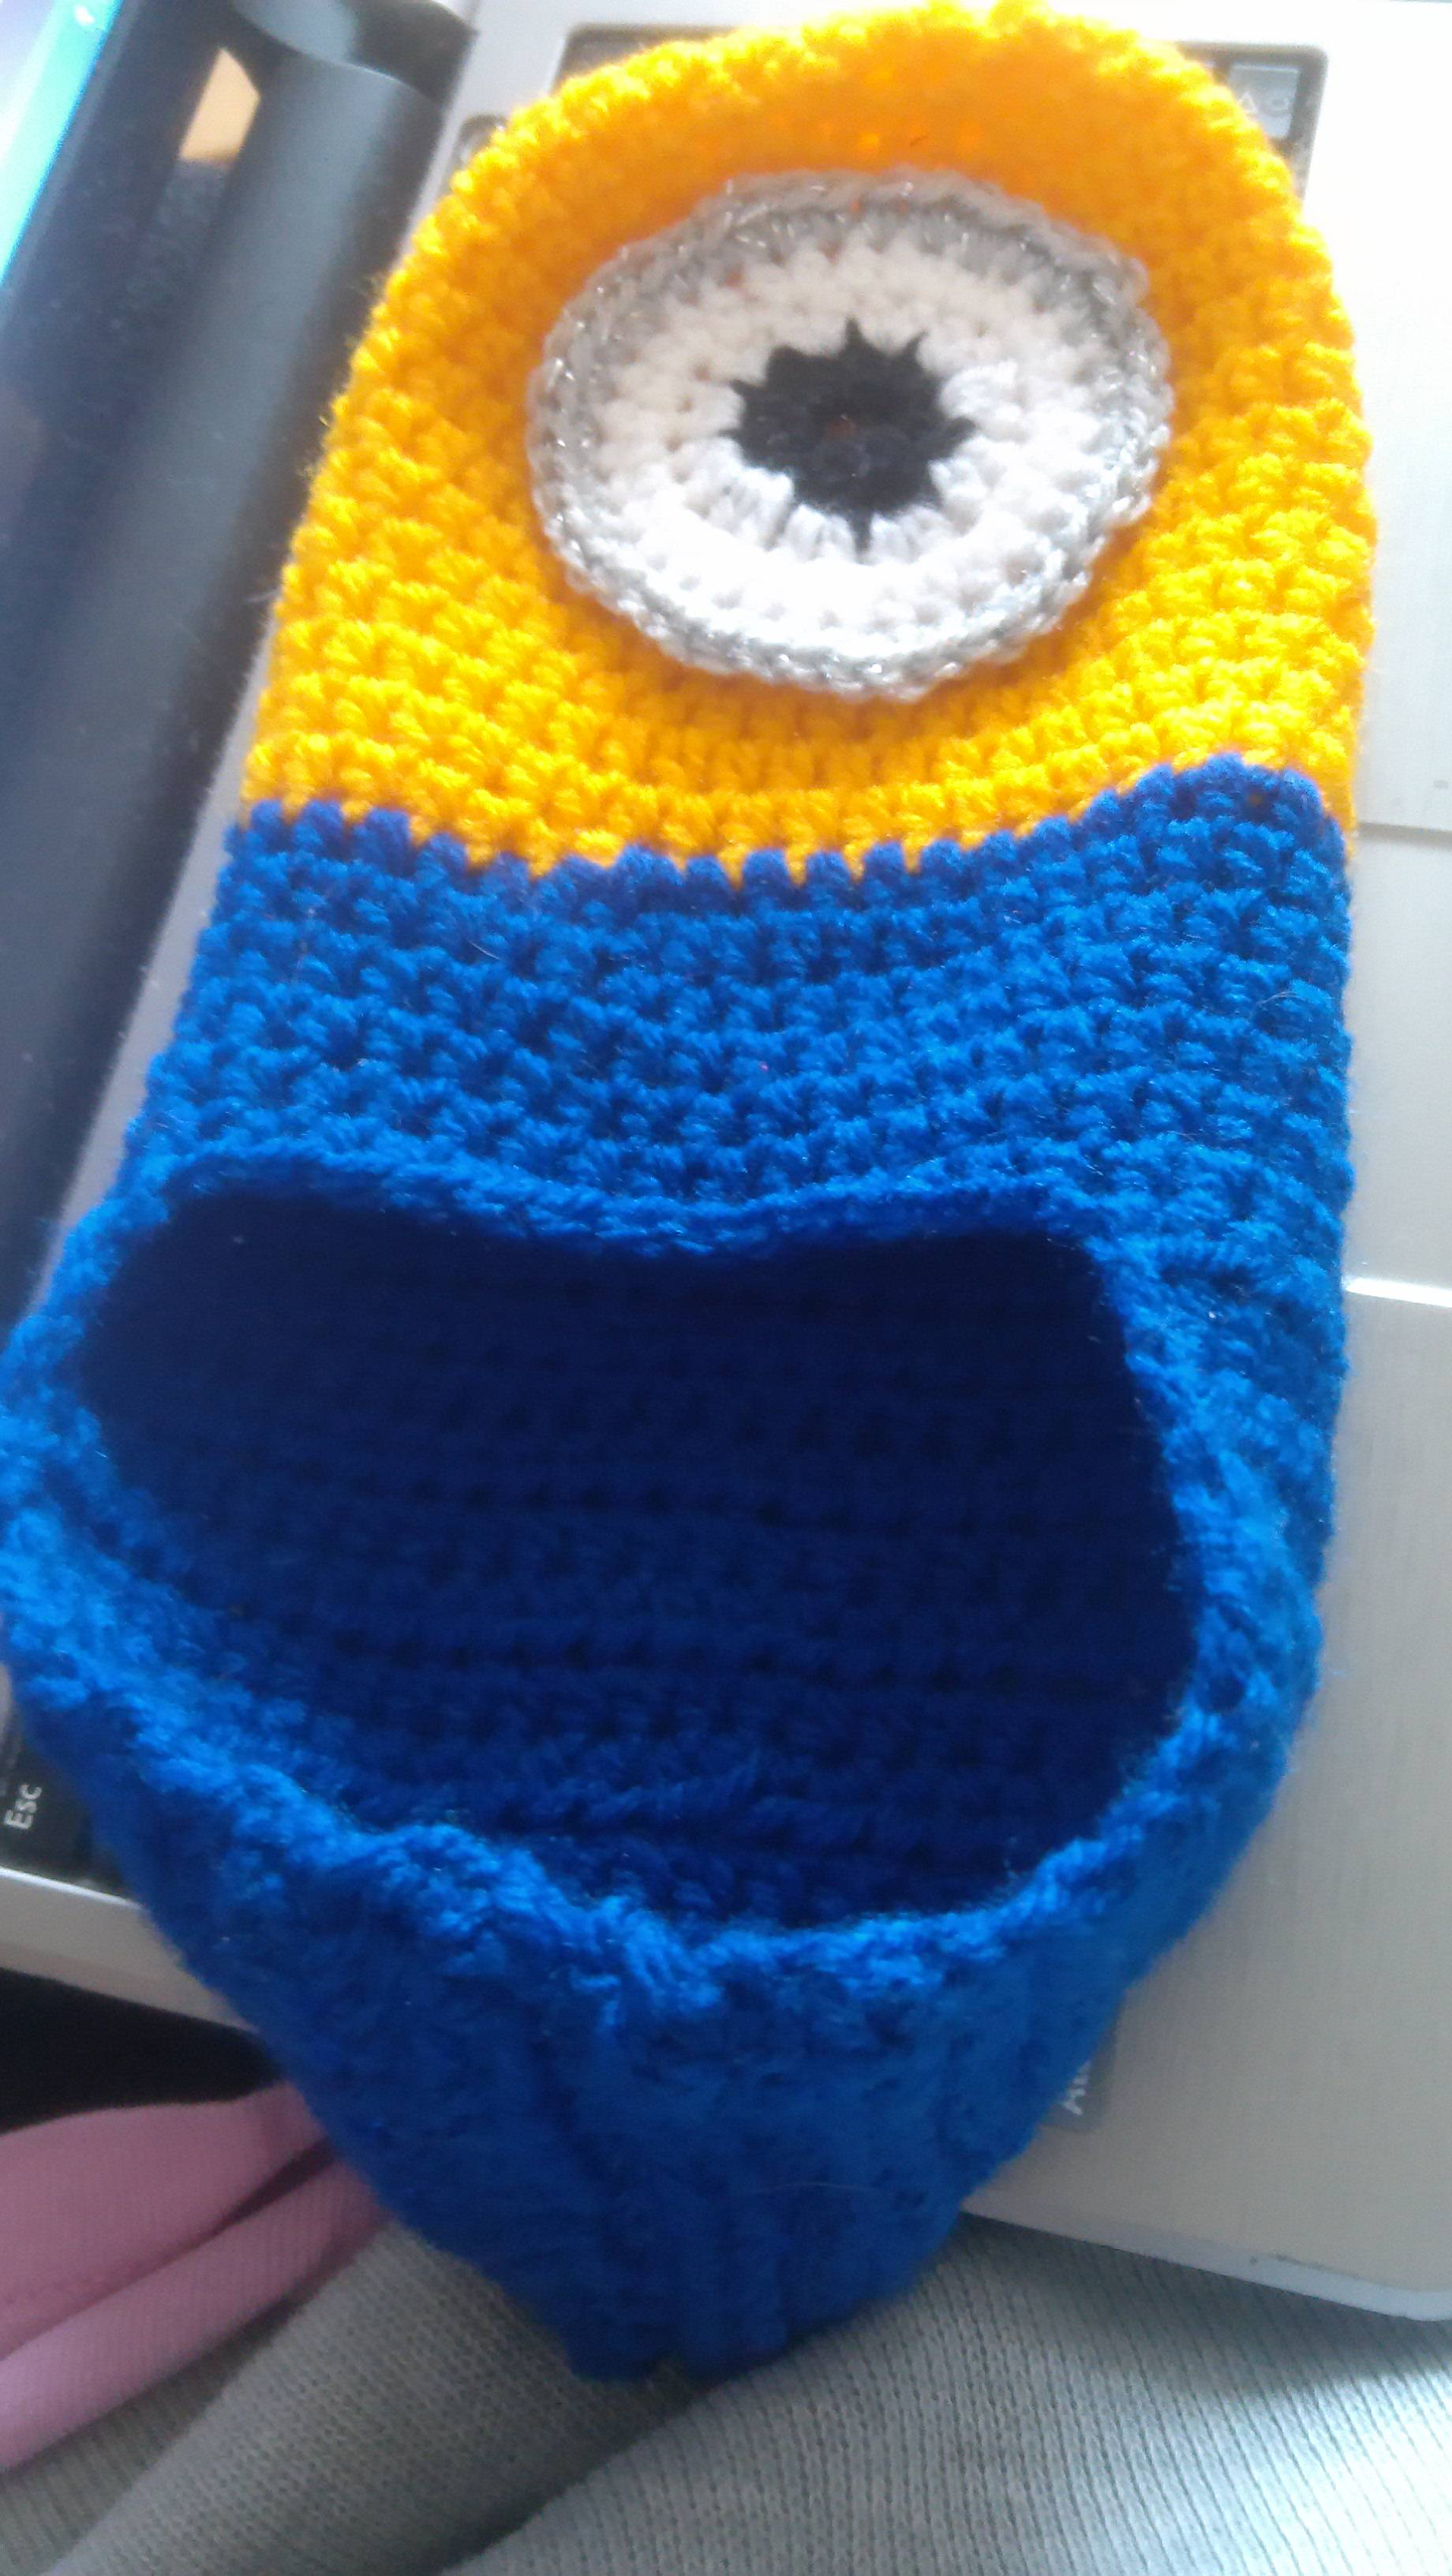 Knitting Patterns For Minions Slippers Inspired Minions Our Free Pattern And Tutorial Uk